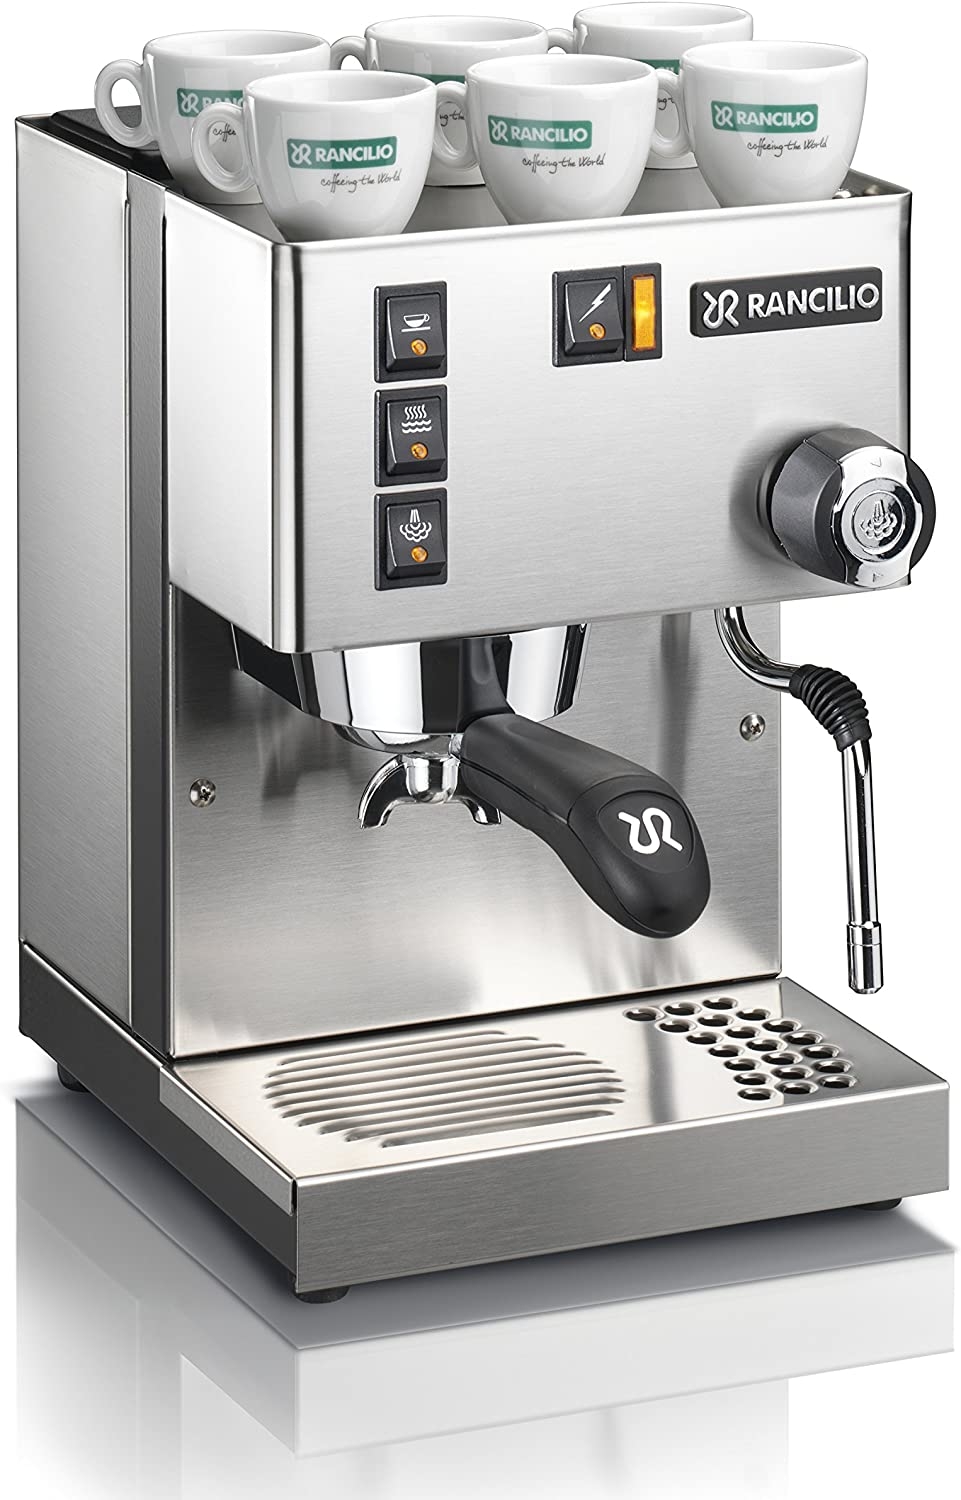 Rancilio Silvia Espresso Machinet,0.3 liters, with Iron Frame and Stainless Steel Side Panels, 11.4 by 13.4-Inch   Import